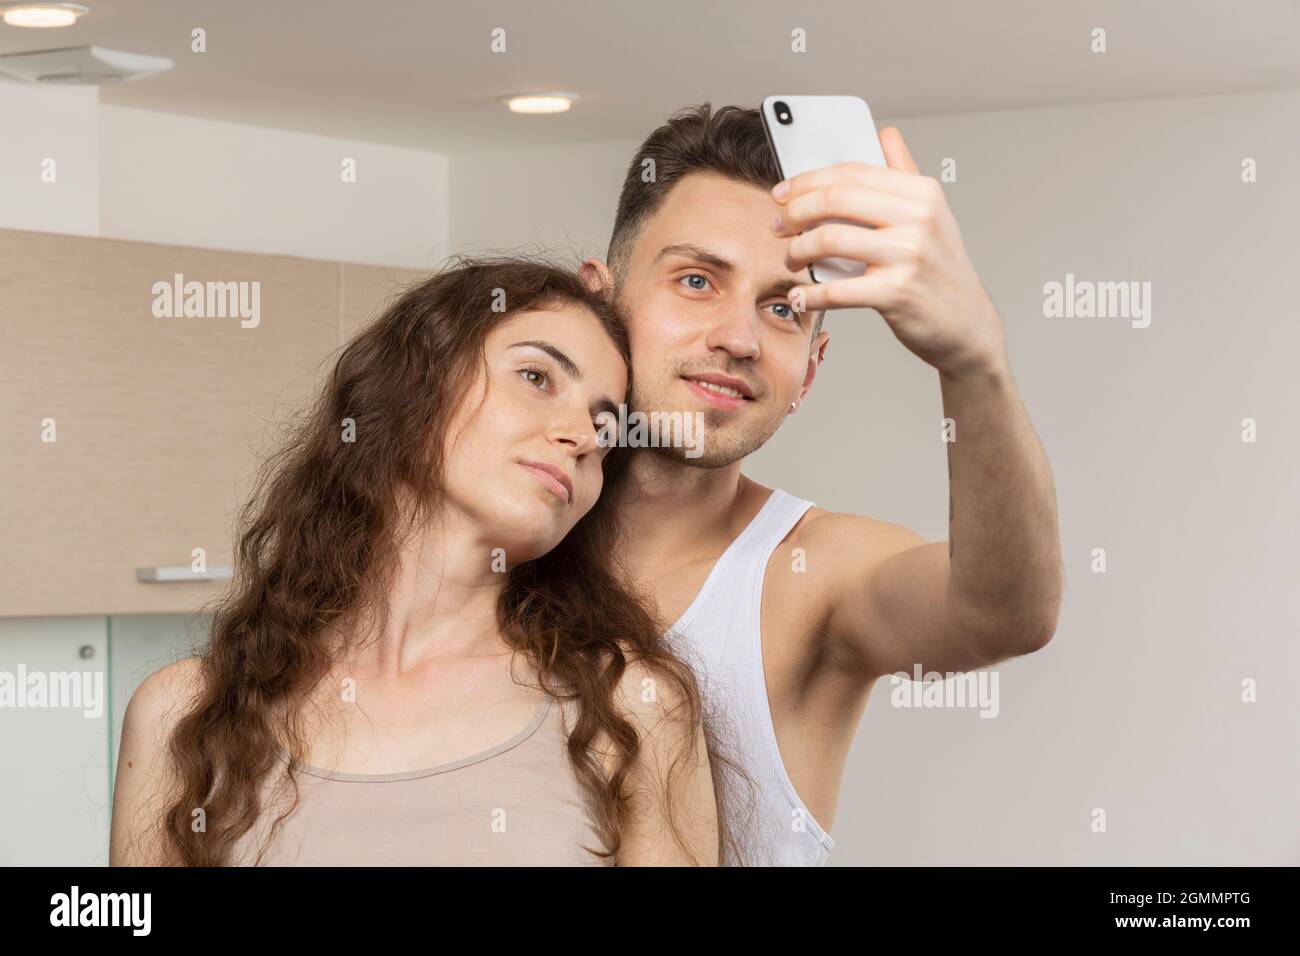 Young couple taking selfie with camera phone Stock Photo